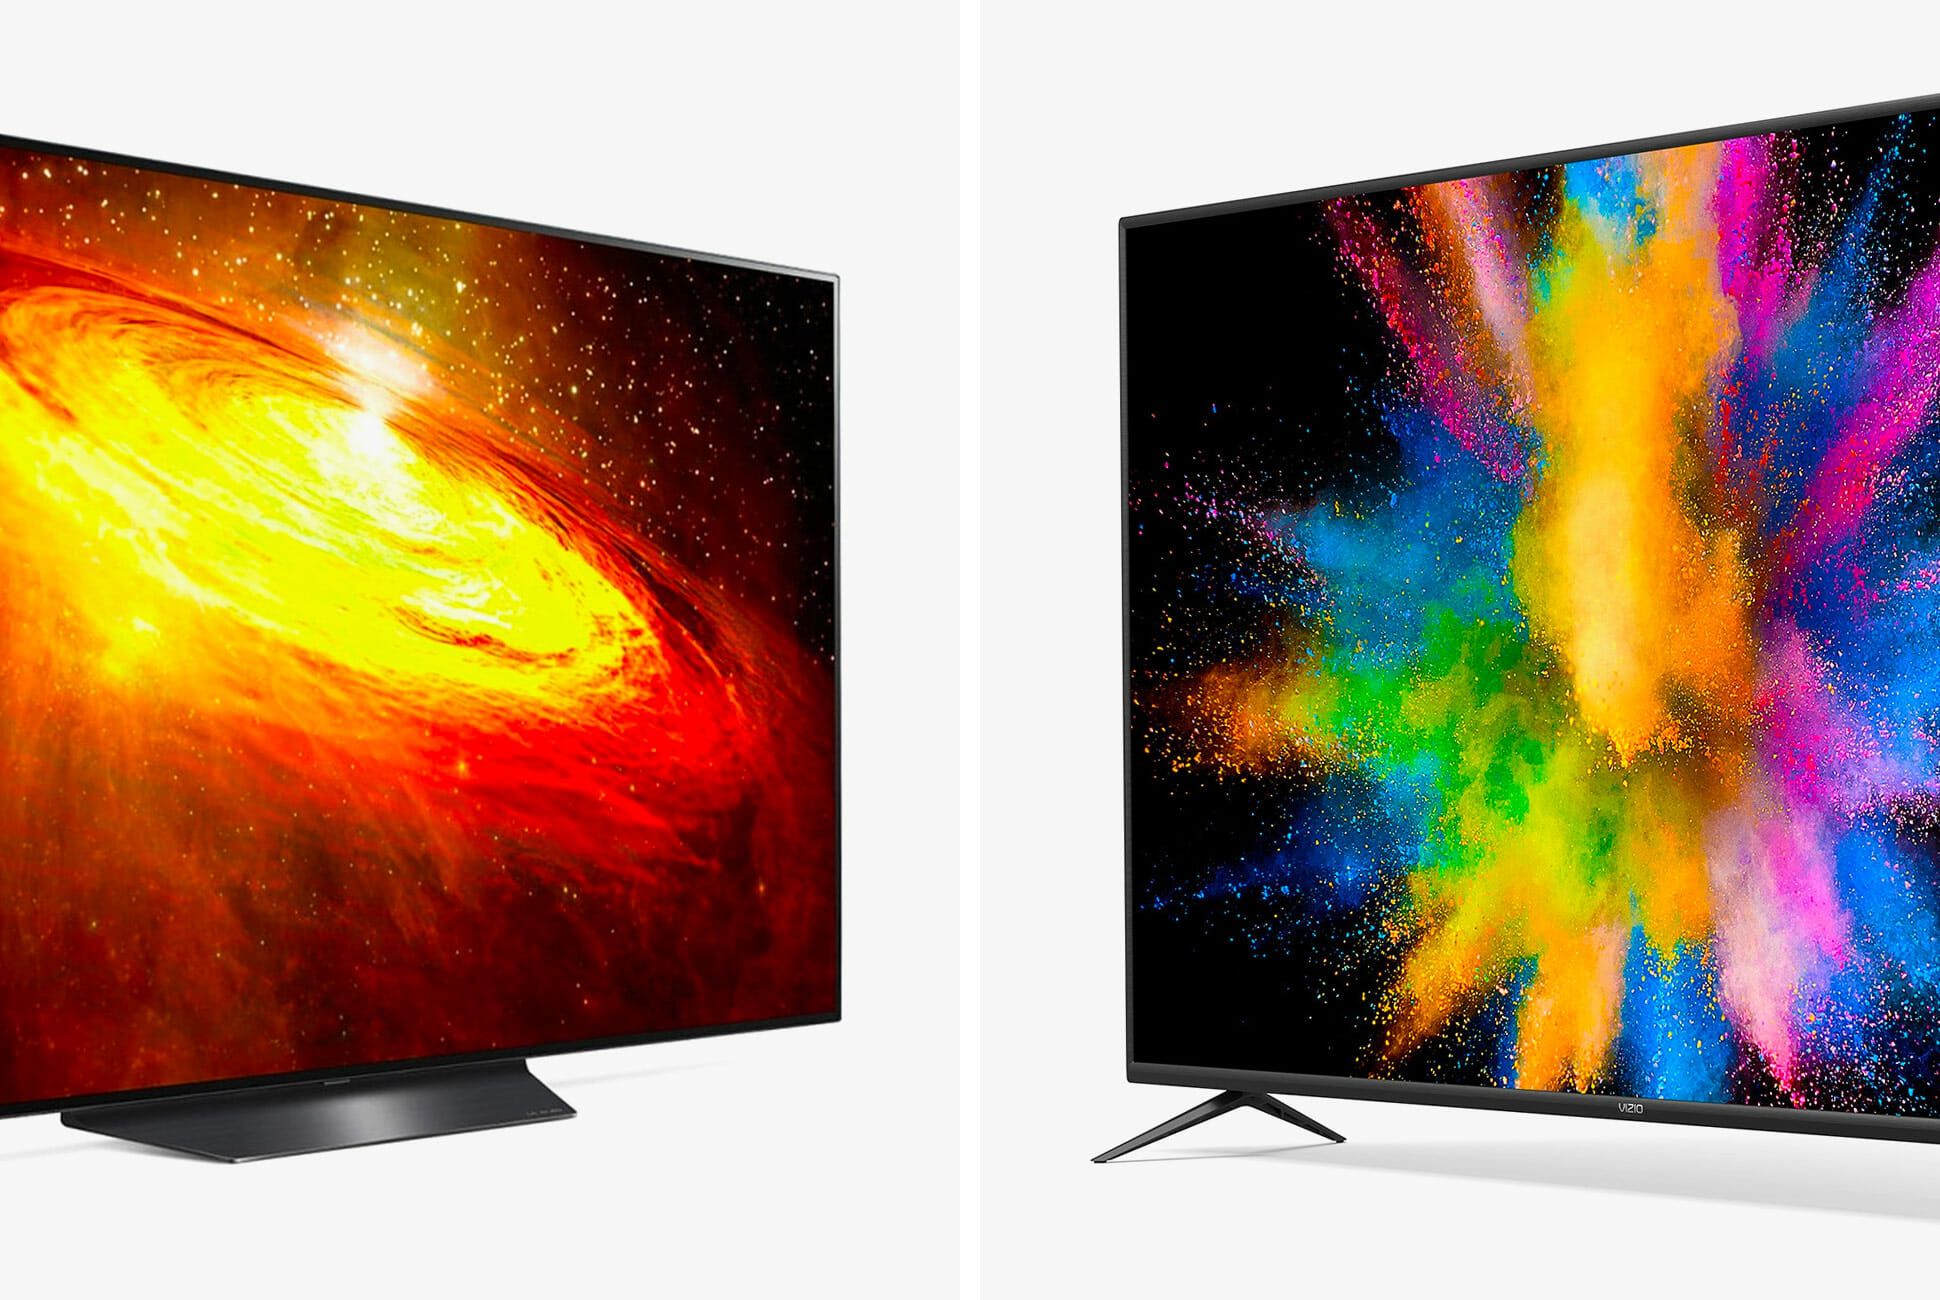 What's the Difference Between a $500 and a $2,000 TV?